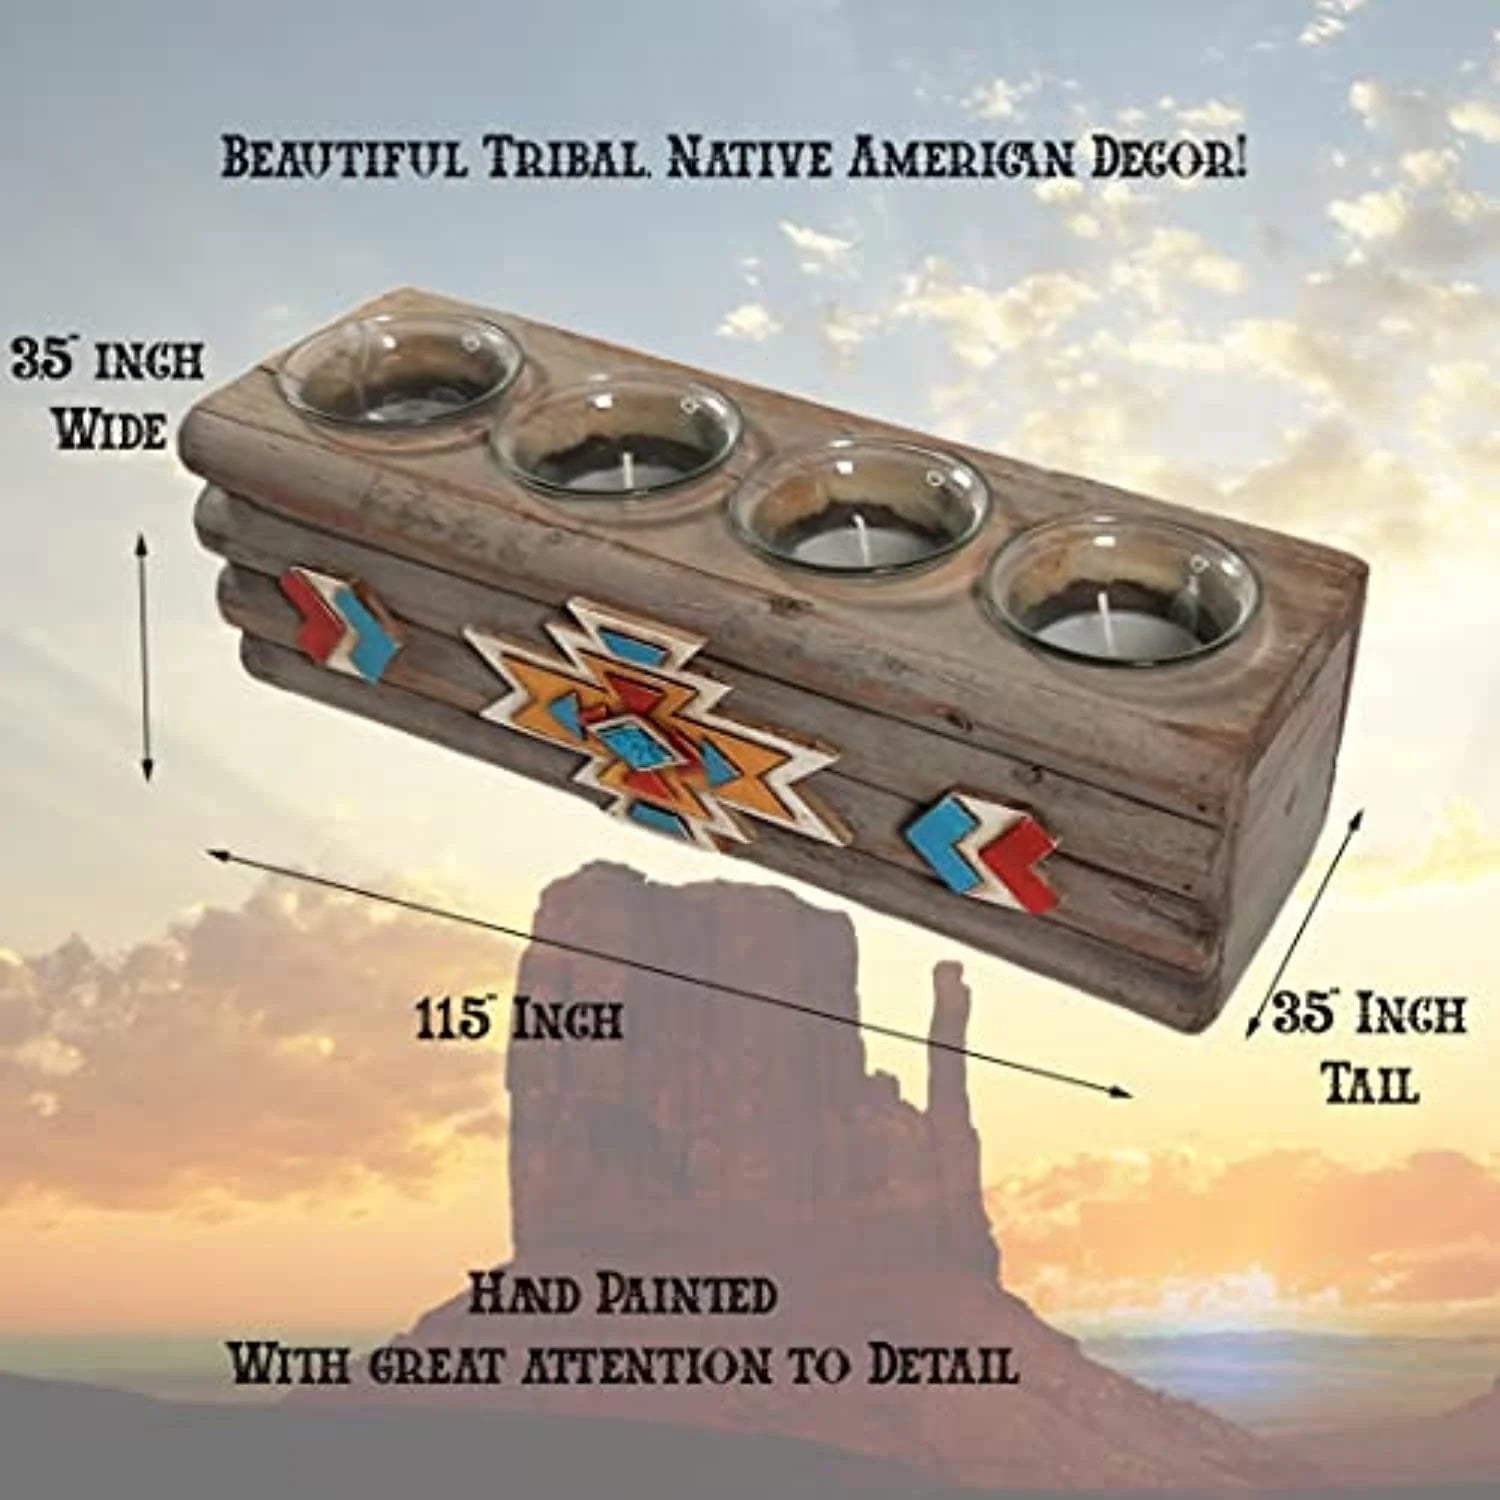 Urbalabs Rustic Aztec Candle Holder